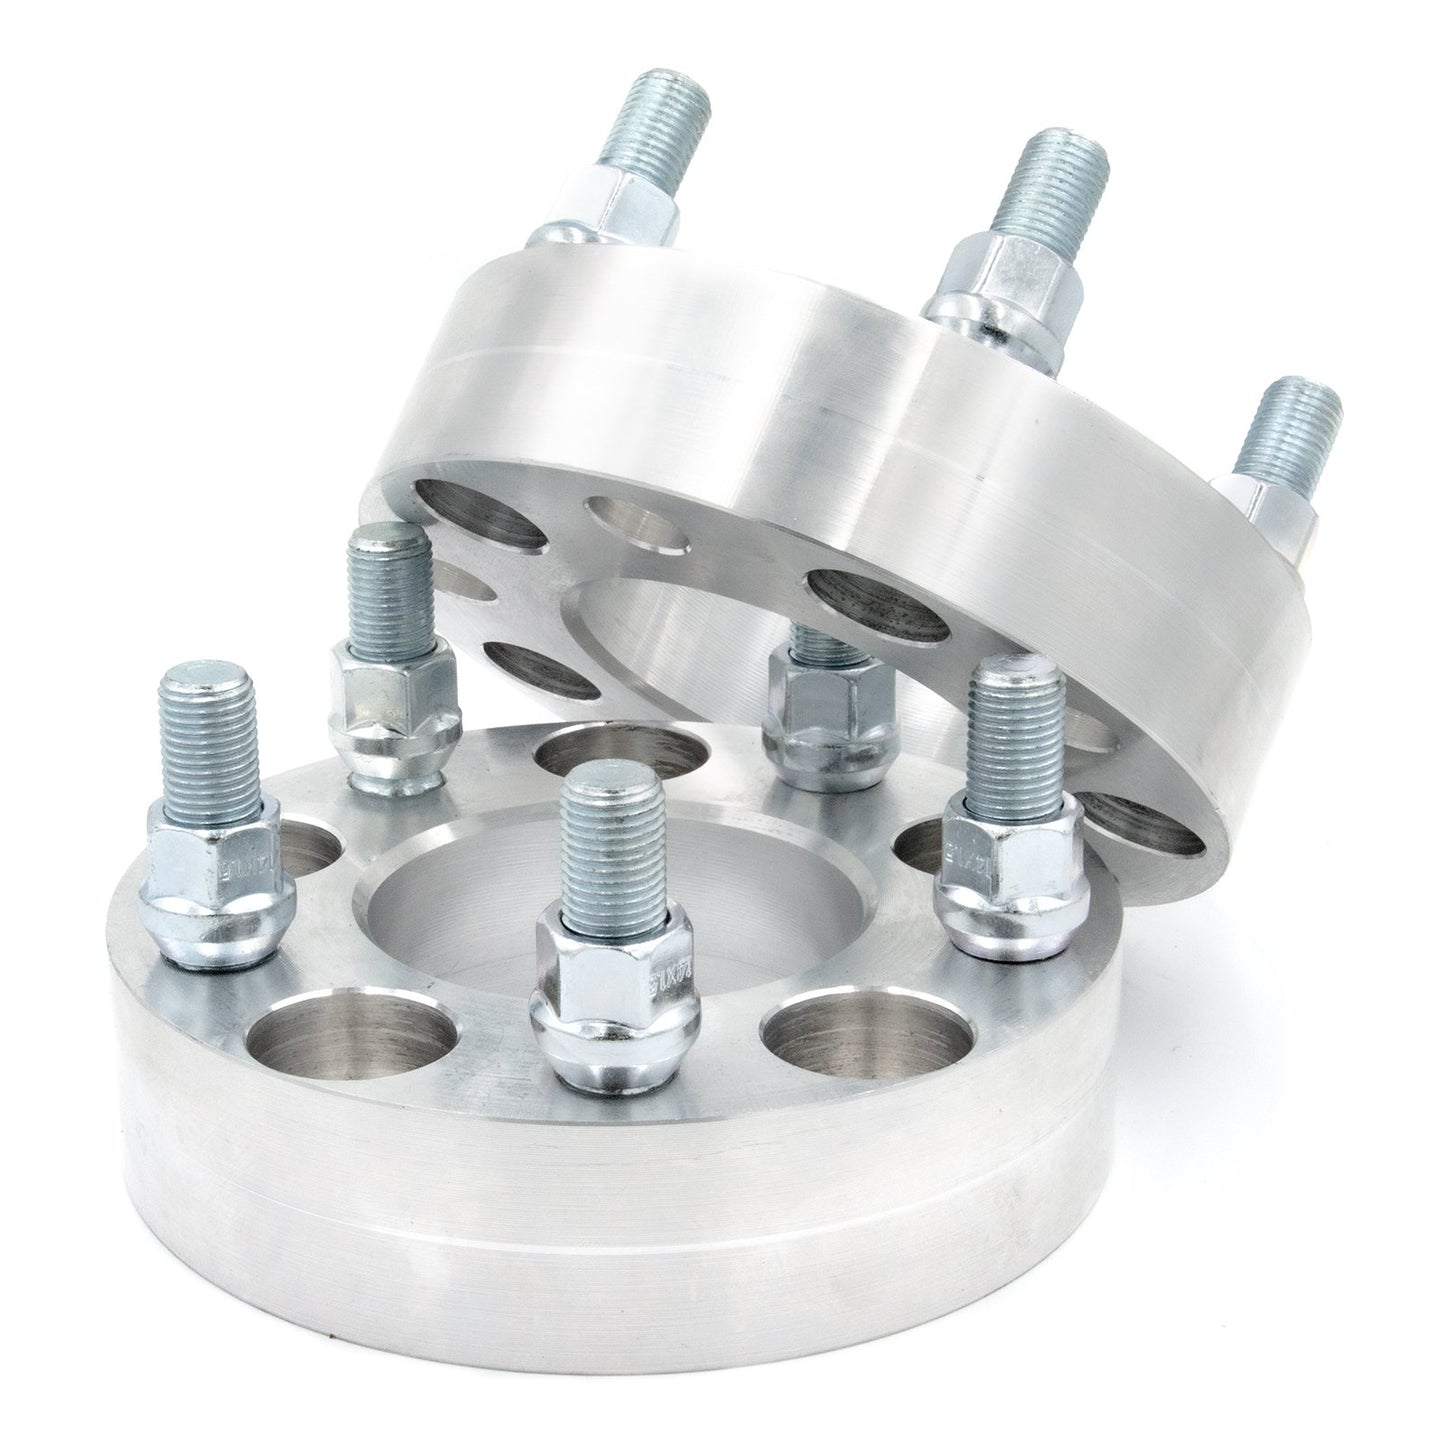 5x110 to 5x120 Wheel Spacer/Adapter - Thickness: 3/4"- 4"